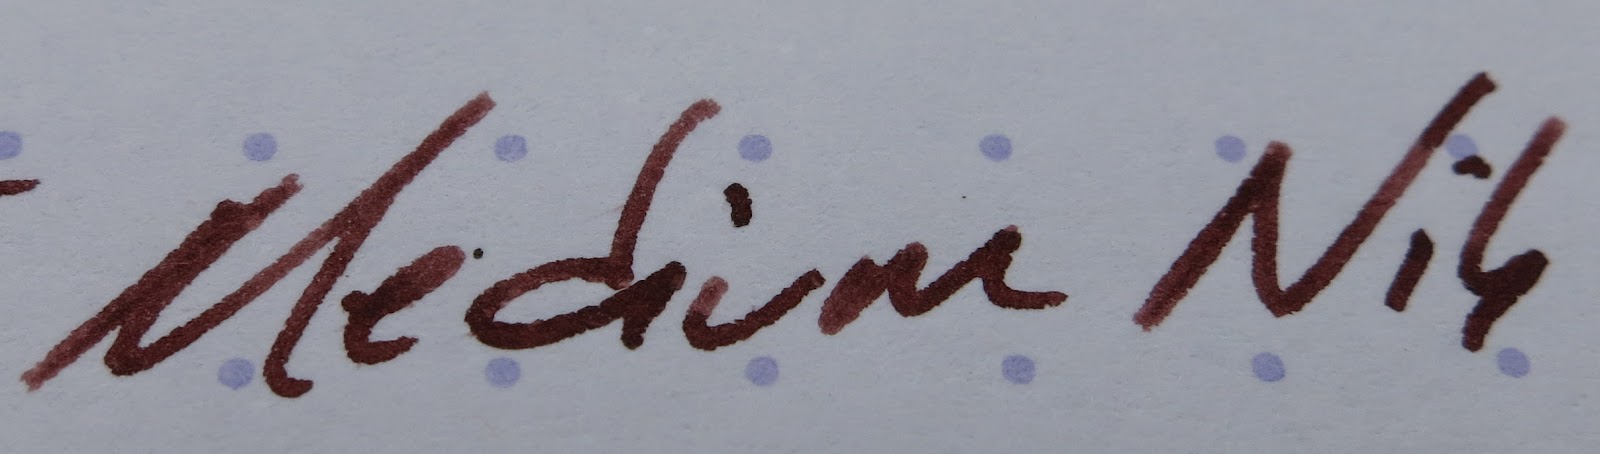 NID. Kaweco's Caramel Brown. I did not expect to love this ink as much as I  do. My favorite brown so far. (And I've tried a few). Goes extremely well  with everything